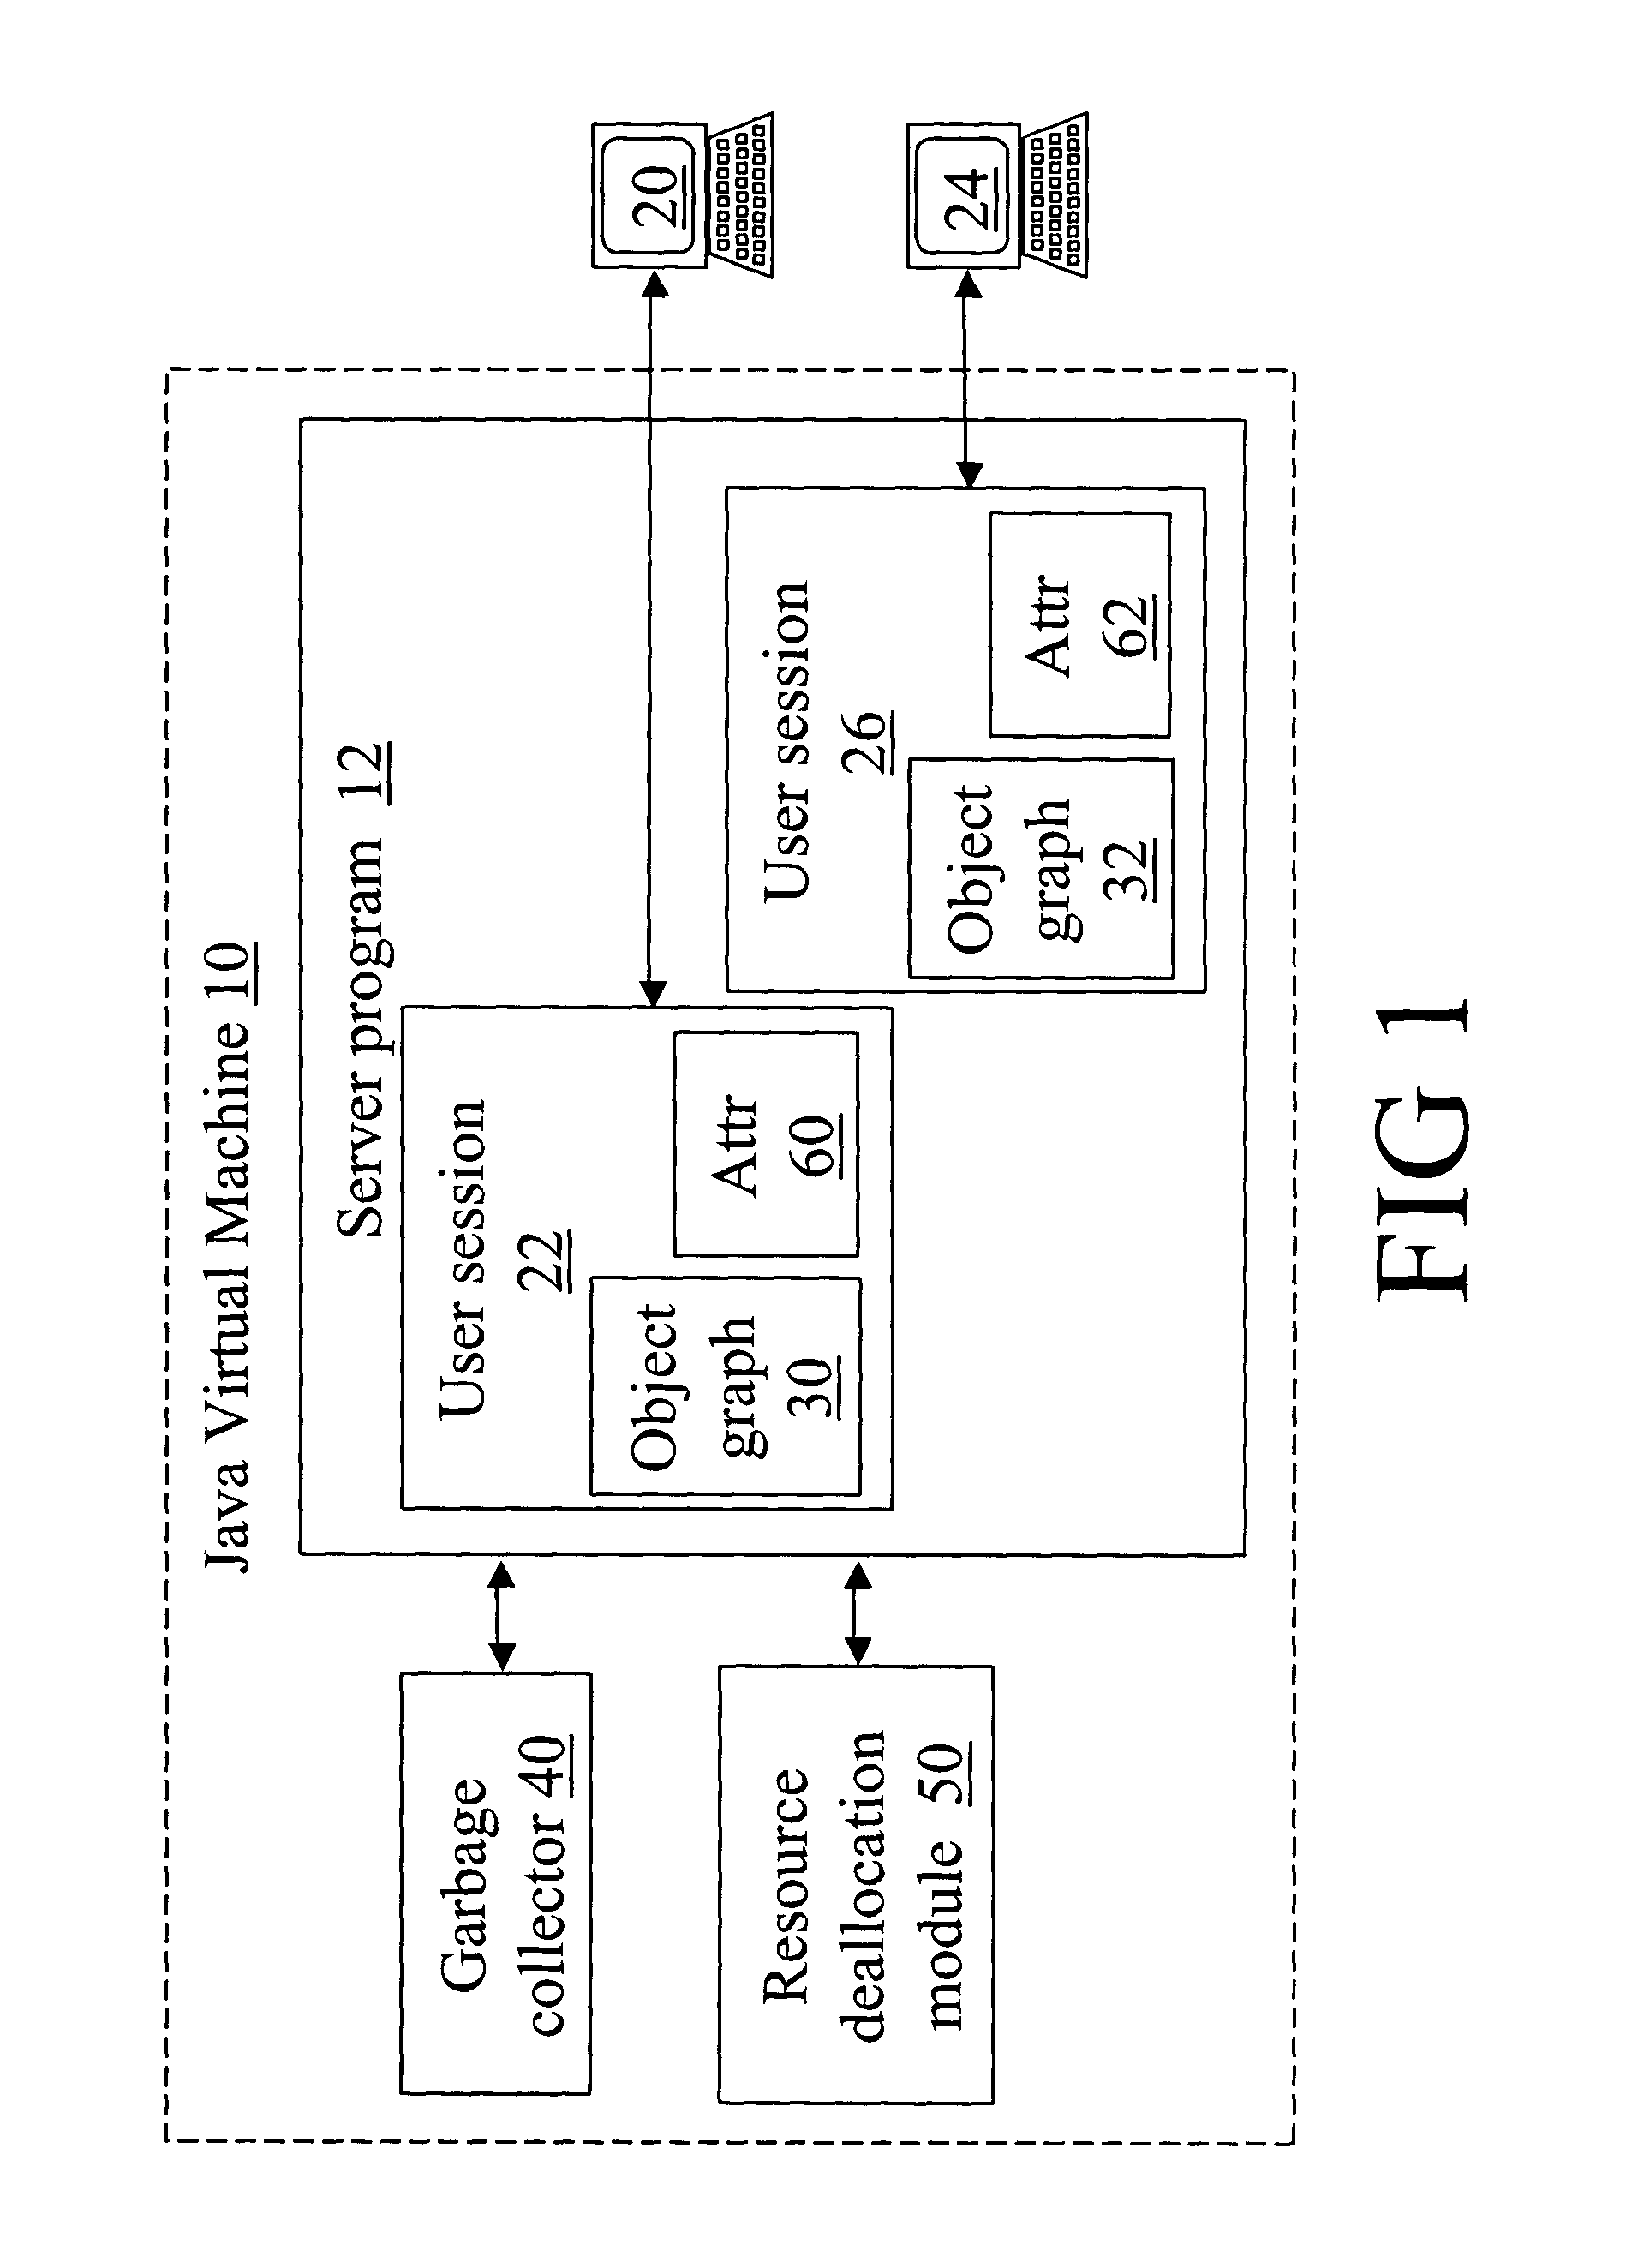 Method and system for resolving memory leaks and releasing obsolete resources from user session data